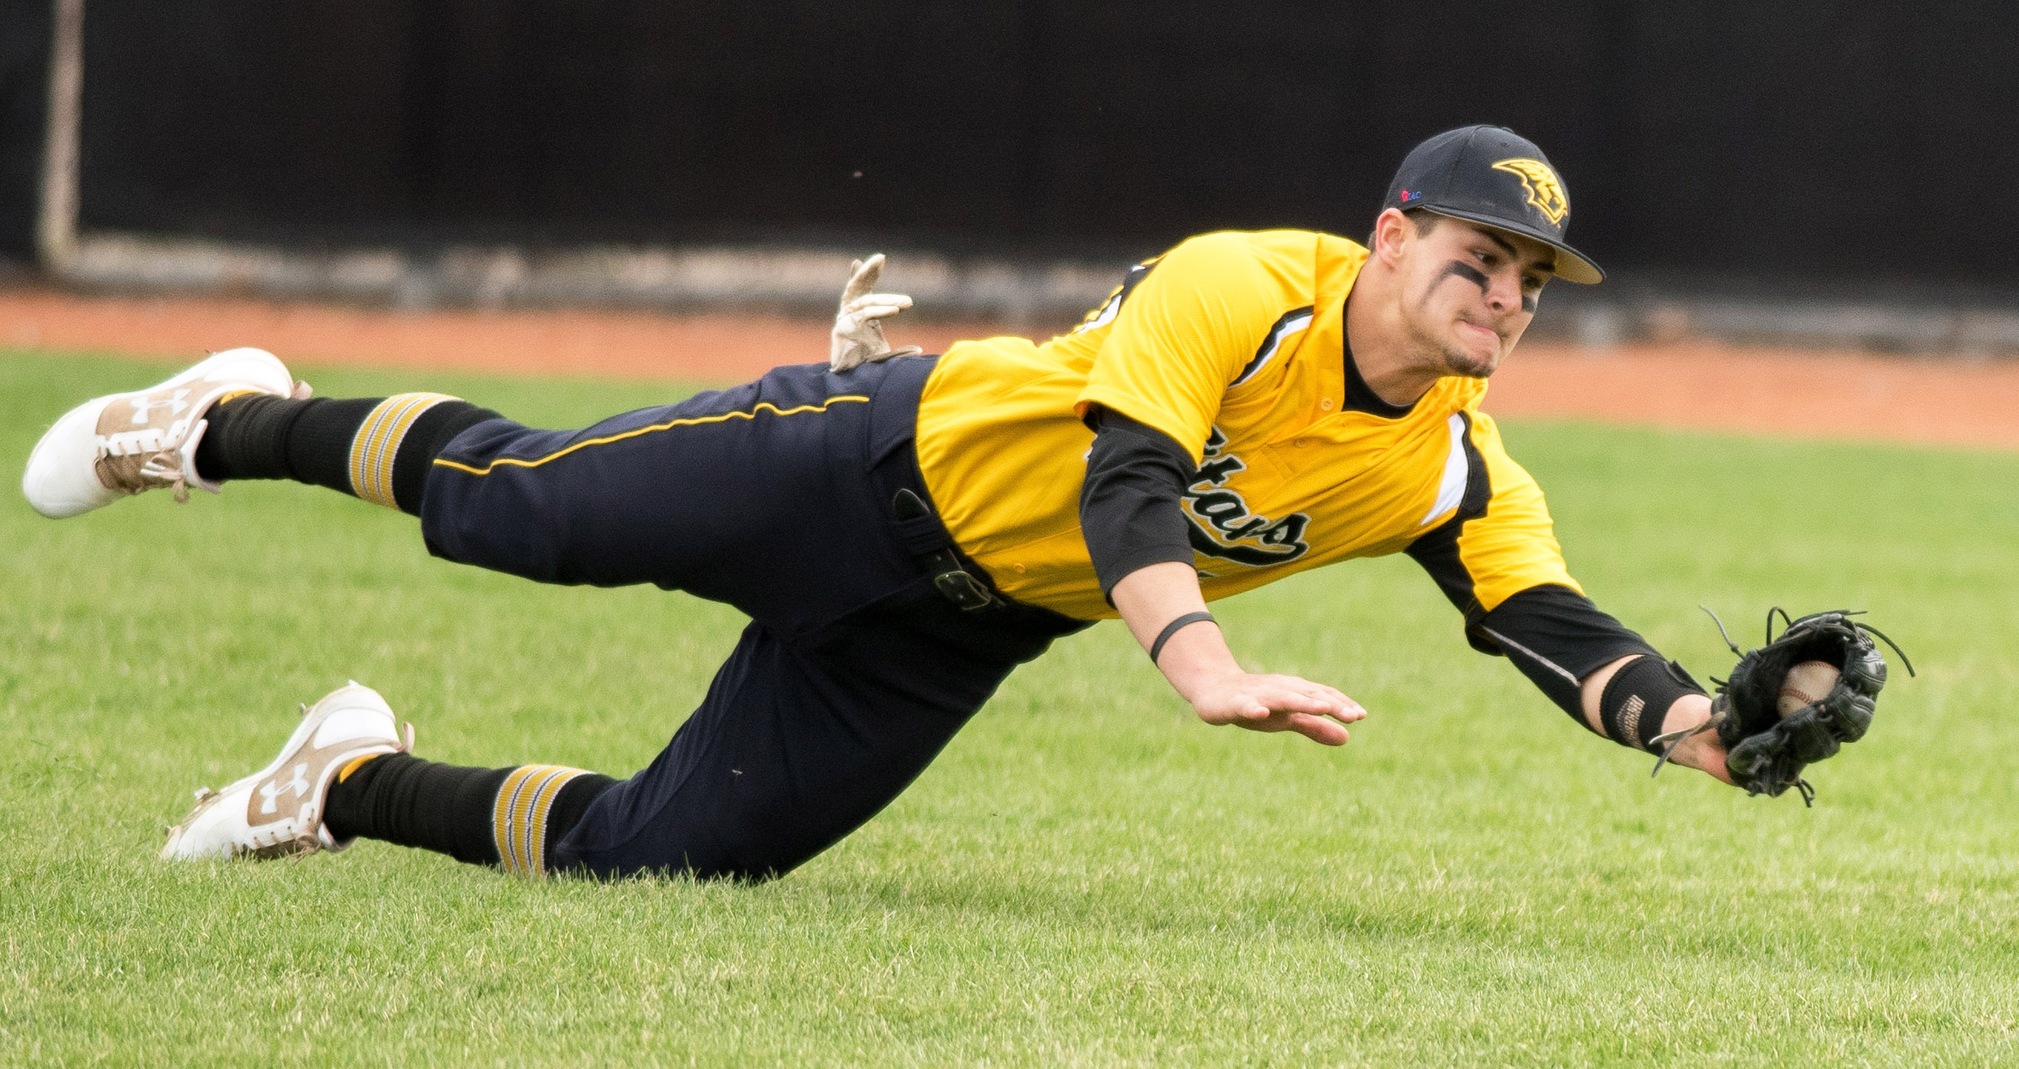 Sam Schwenn recorded 10 putouts during the doubleheader with the Eagles, including this diving catch.